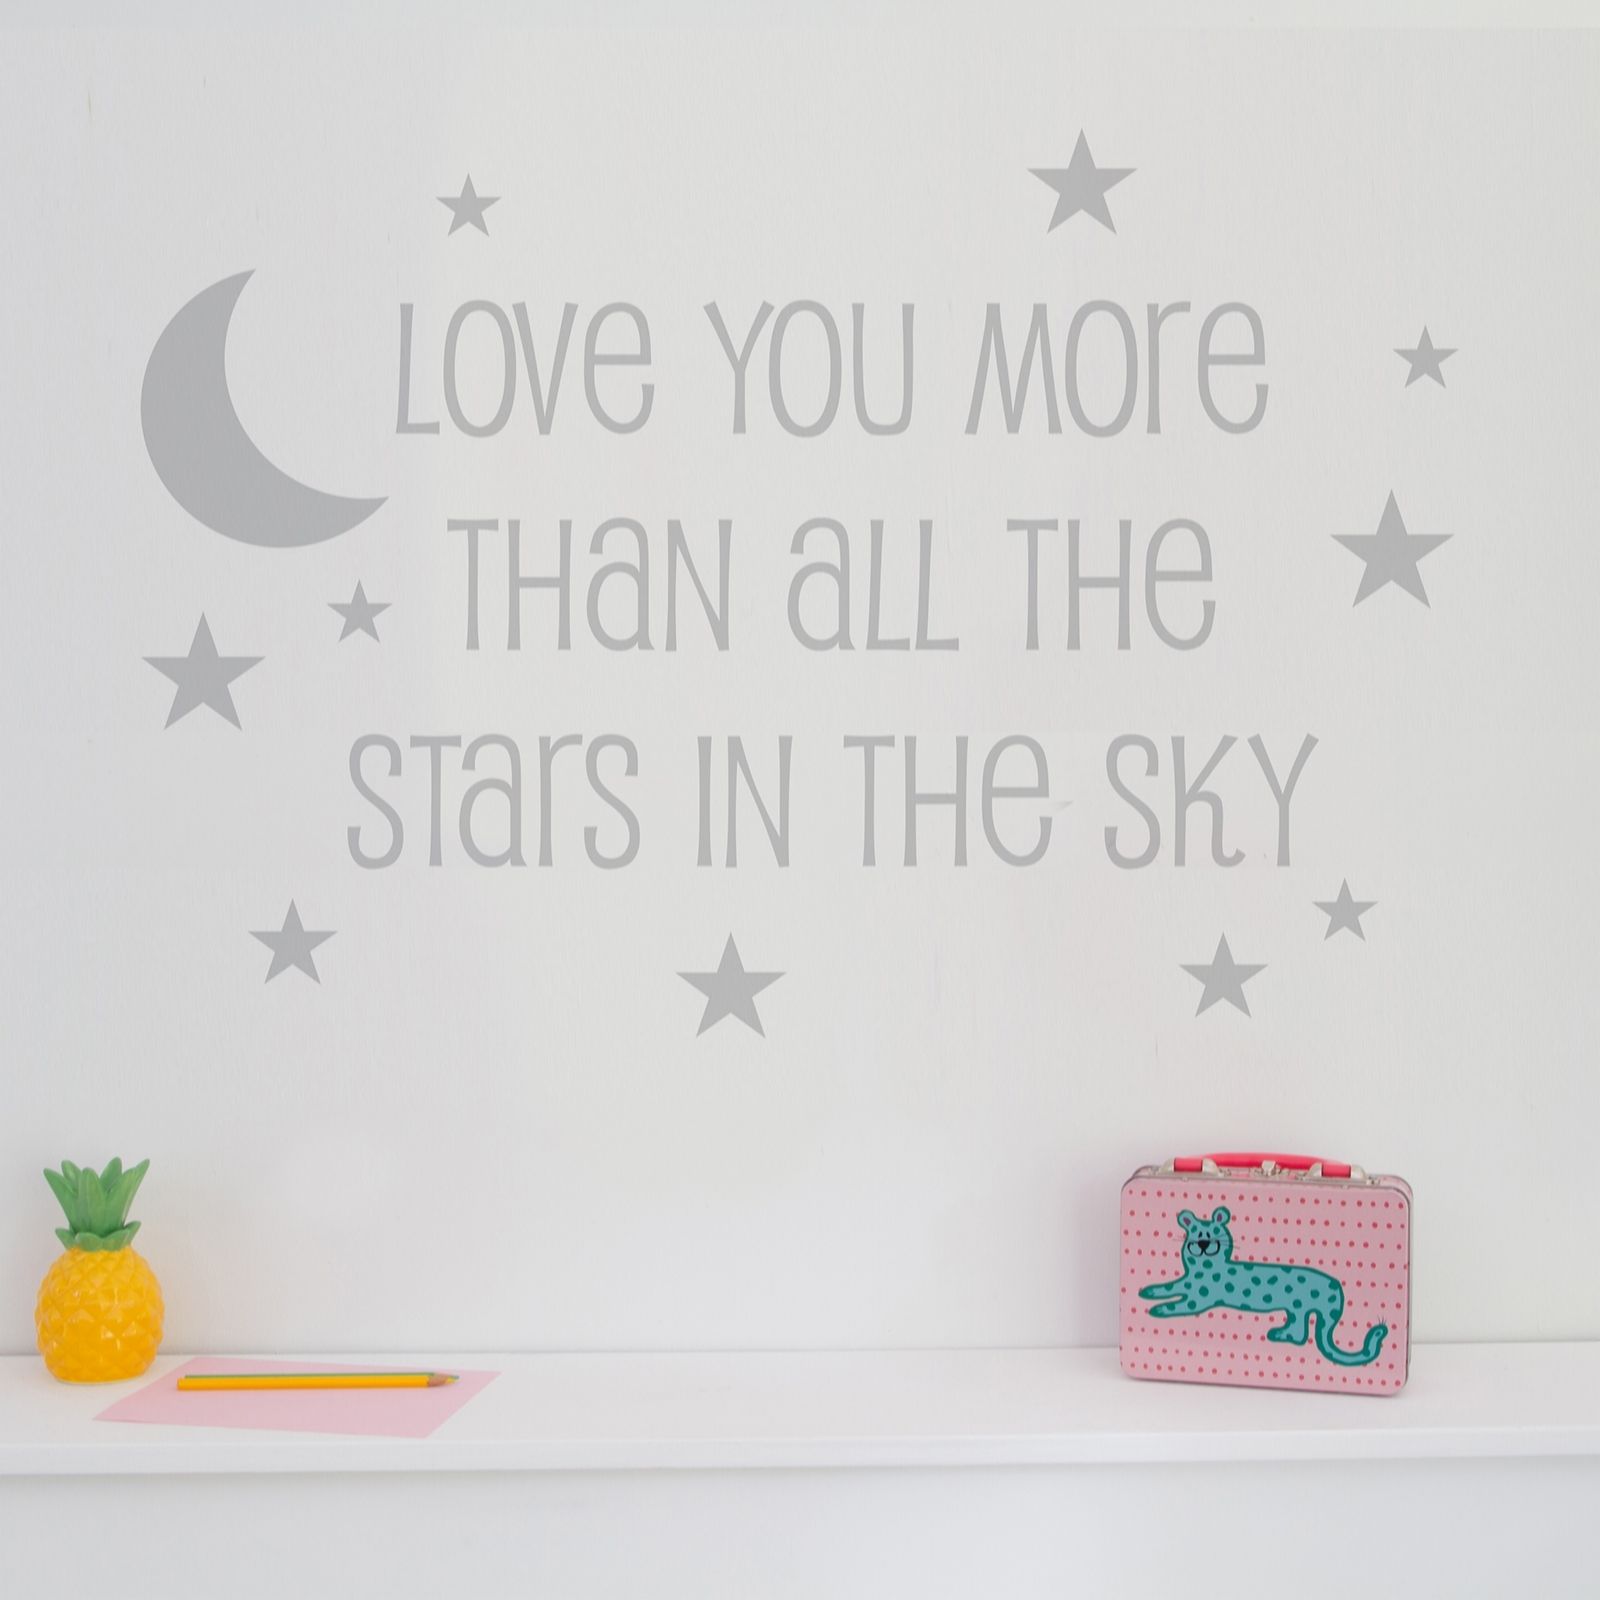 Nutmeg Designs Love You More Than All The Stars In The Sky Wall Stickers Qvc Uk